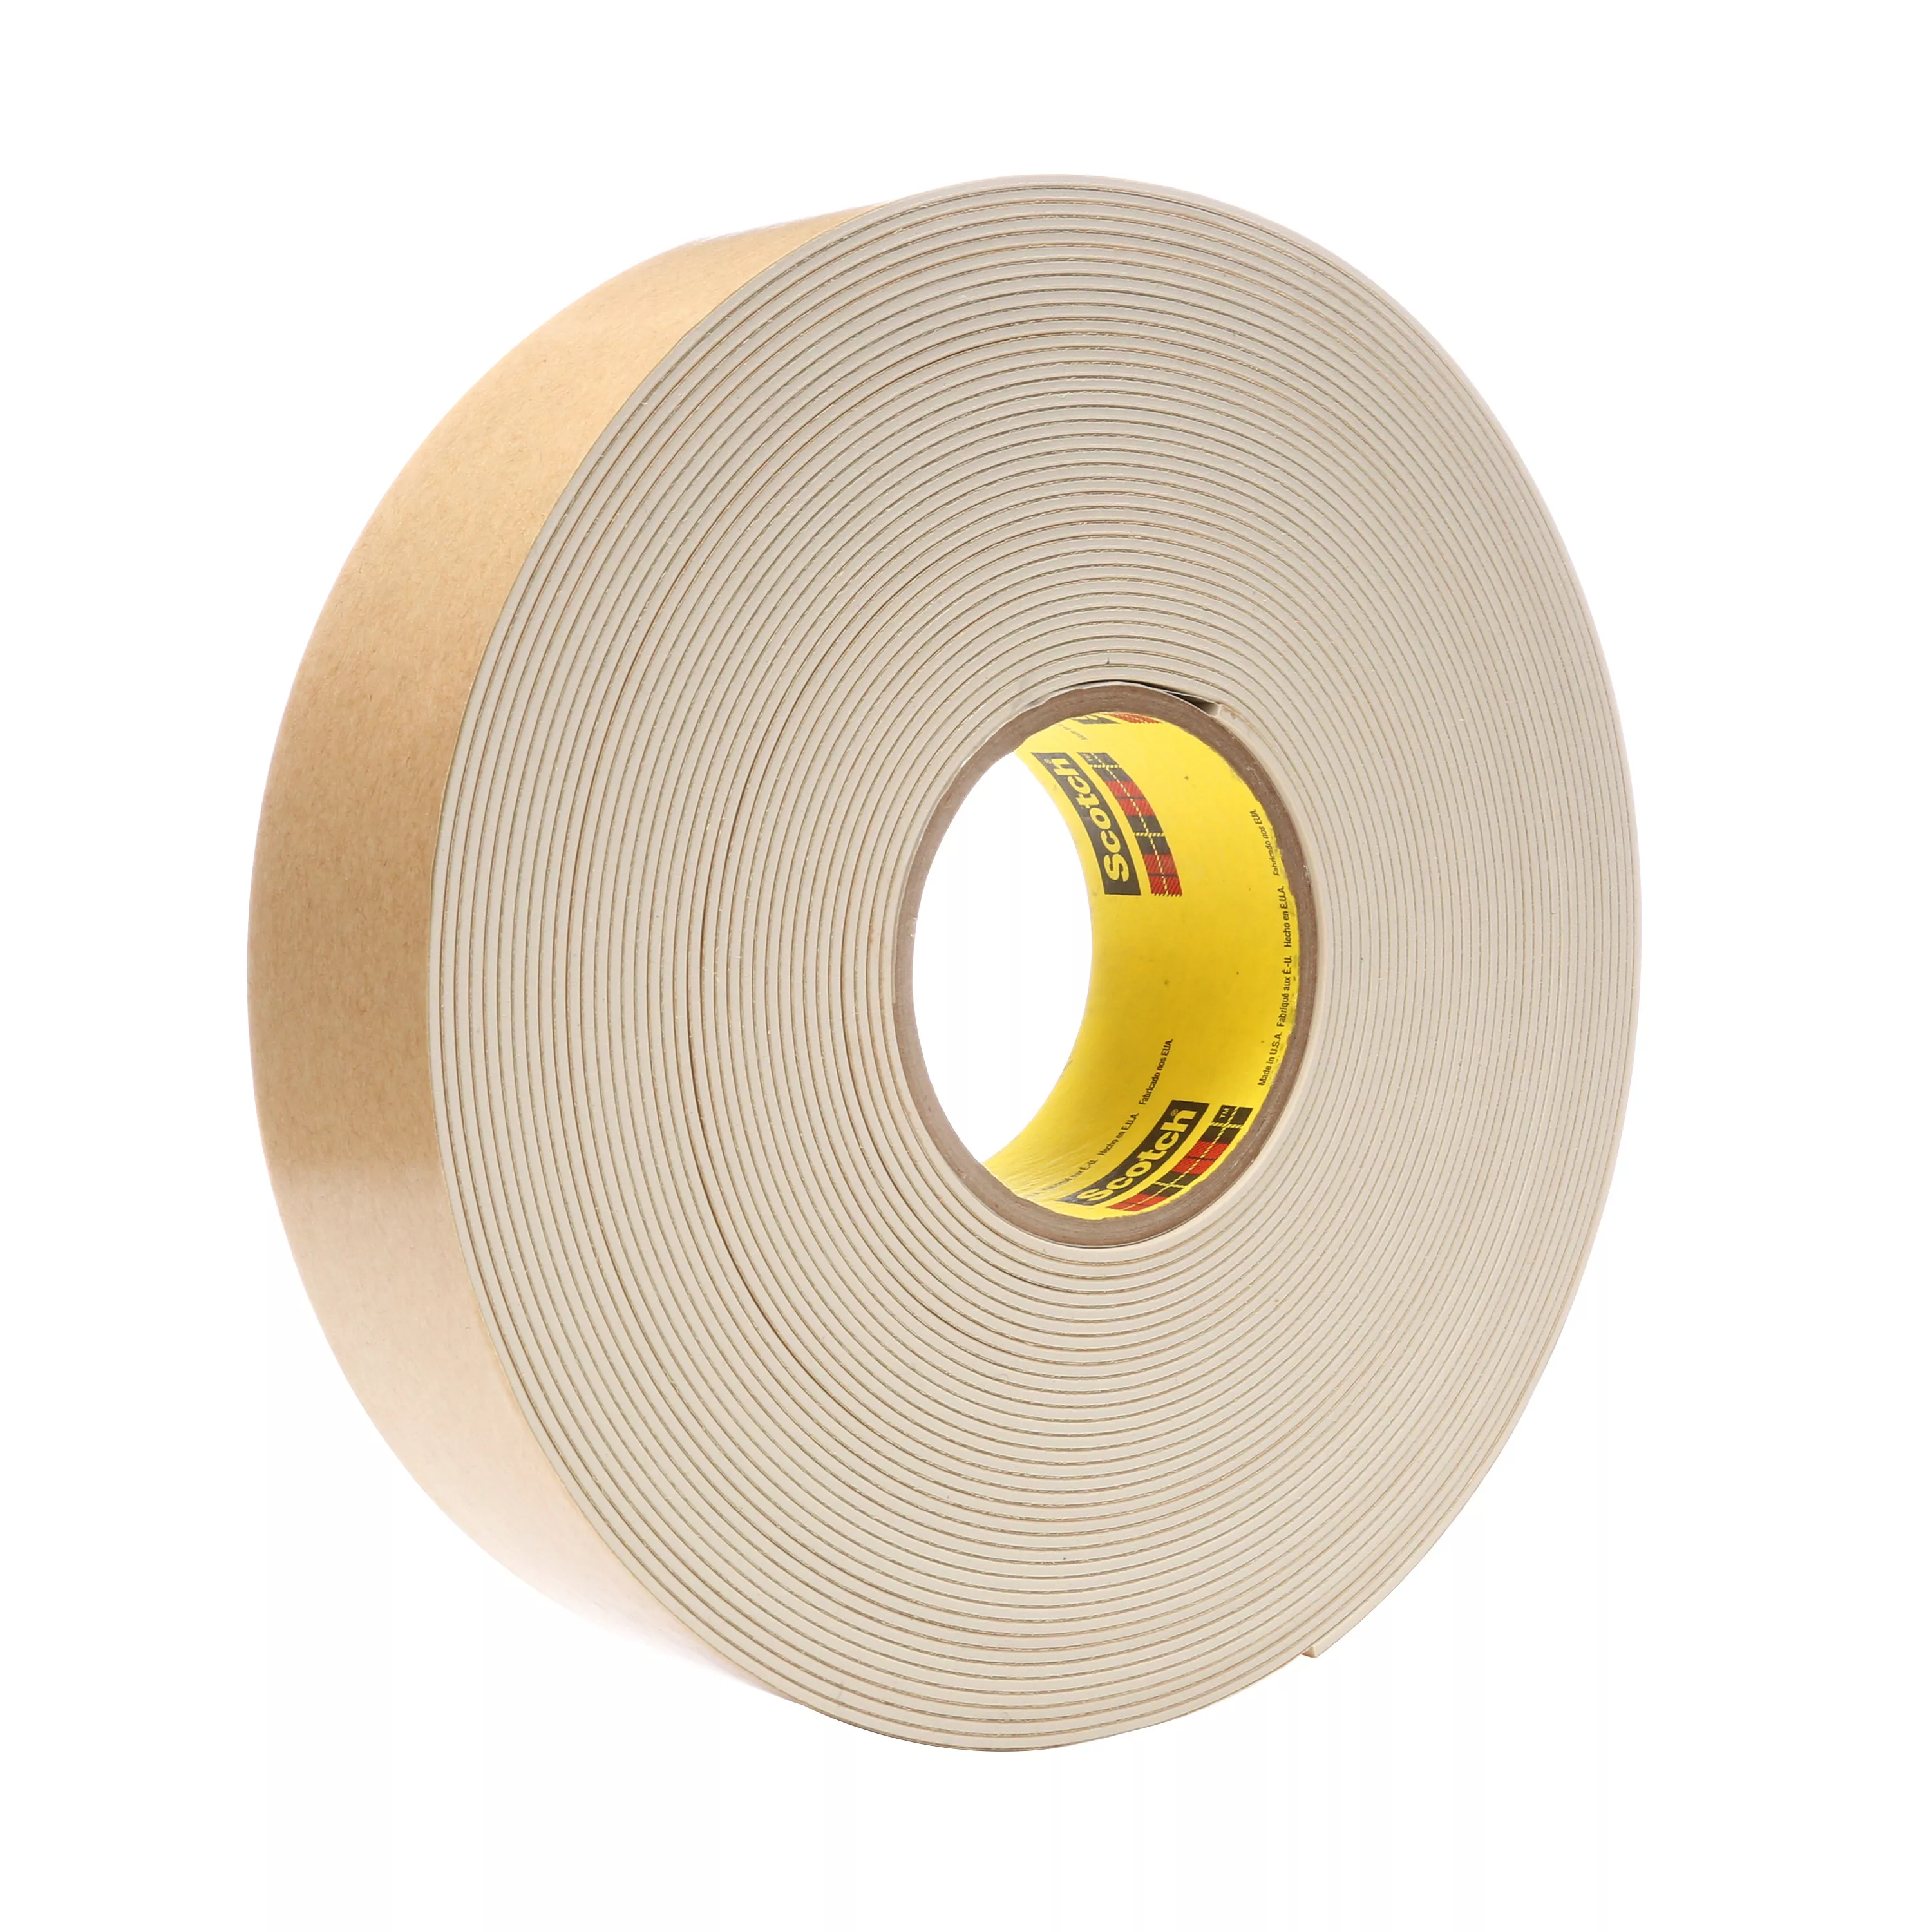 3M™ Impact Stripping Tape 528, Tan, 2 in x 20 yd, 82 mil, 6 Roll/Case